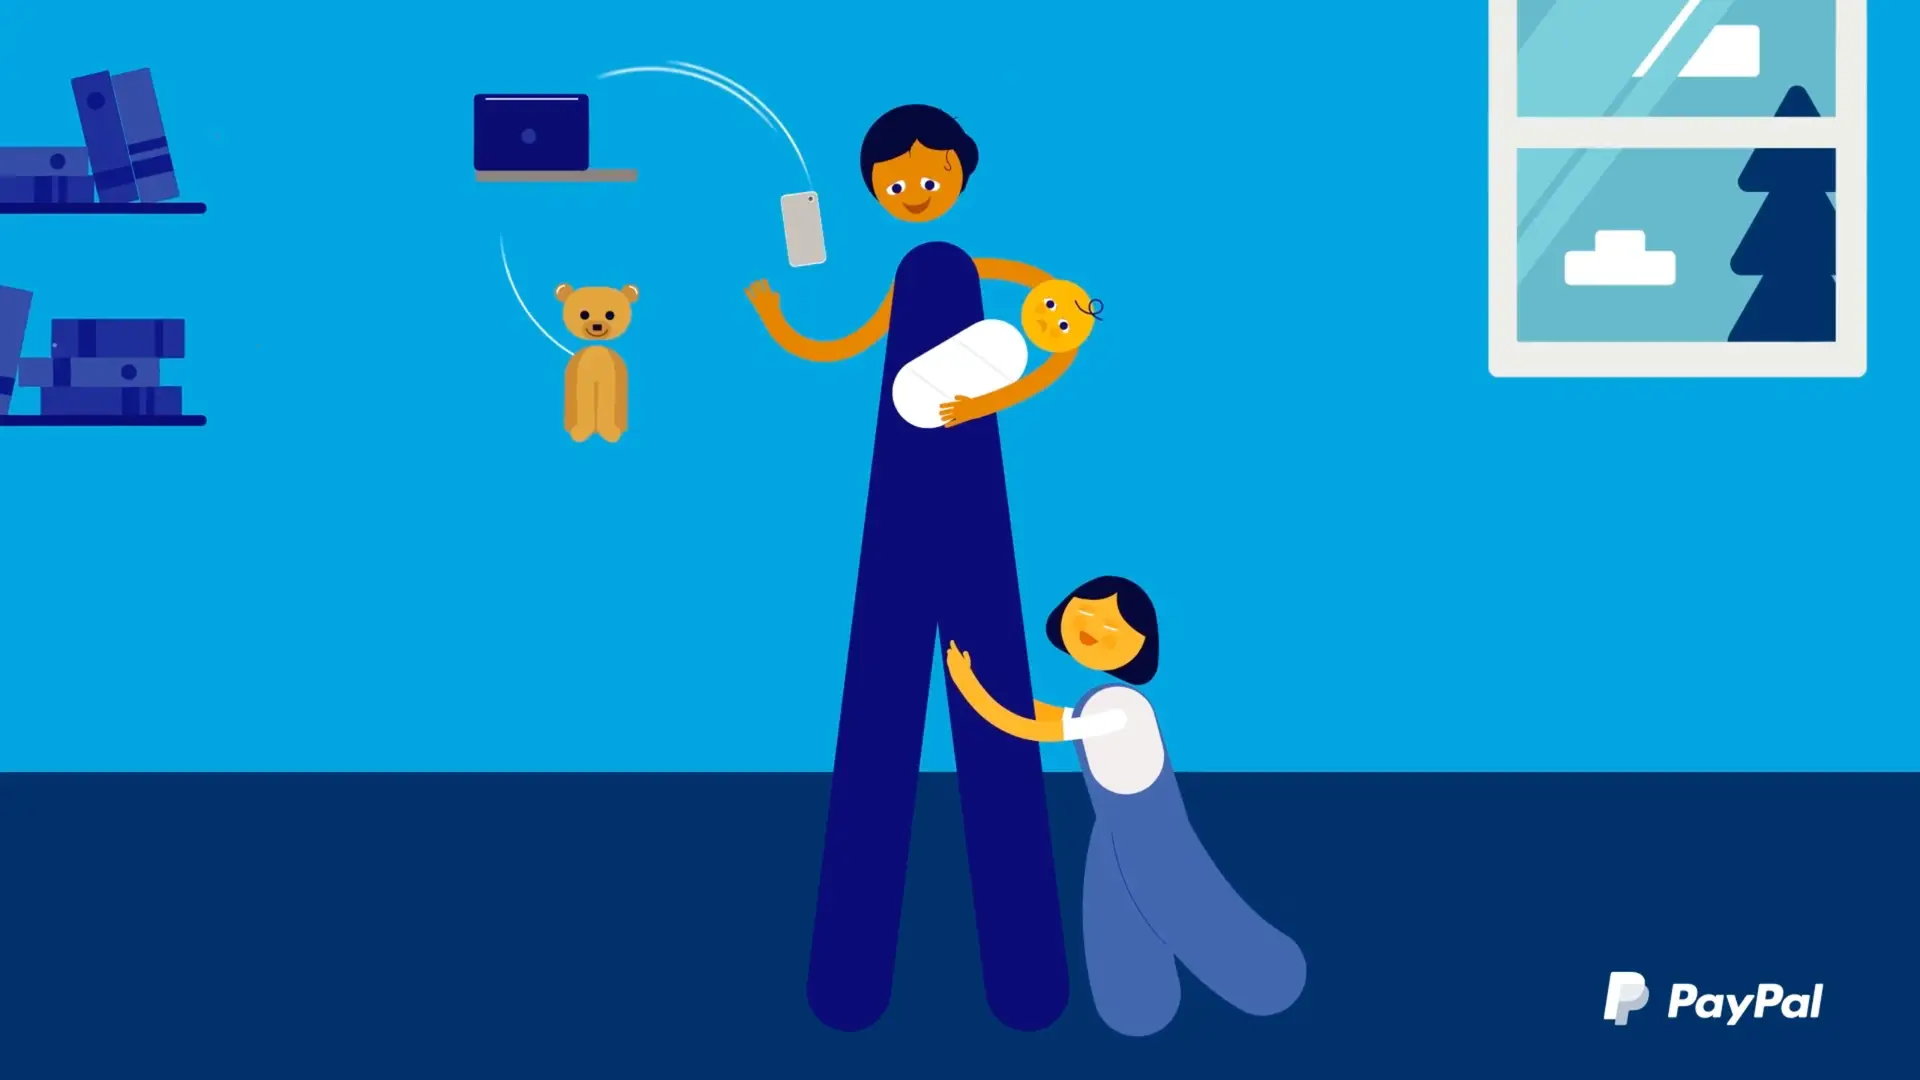 An illustration of a woman and child holding a PayPal phone, depicting the online payment platform.